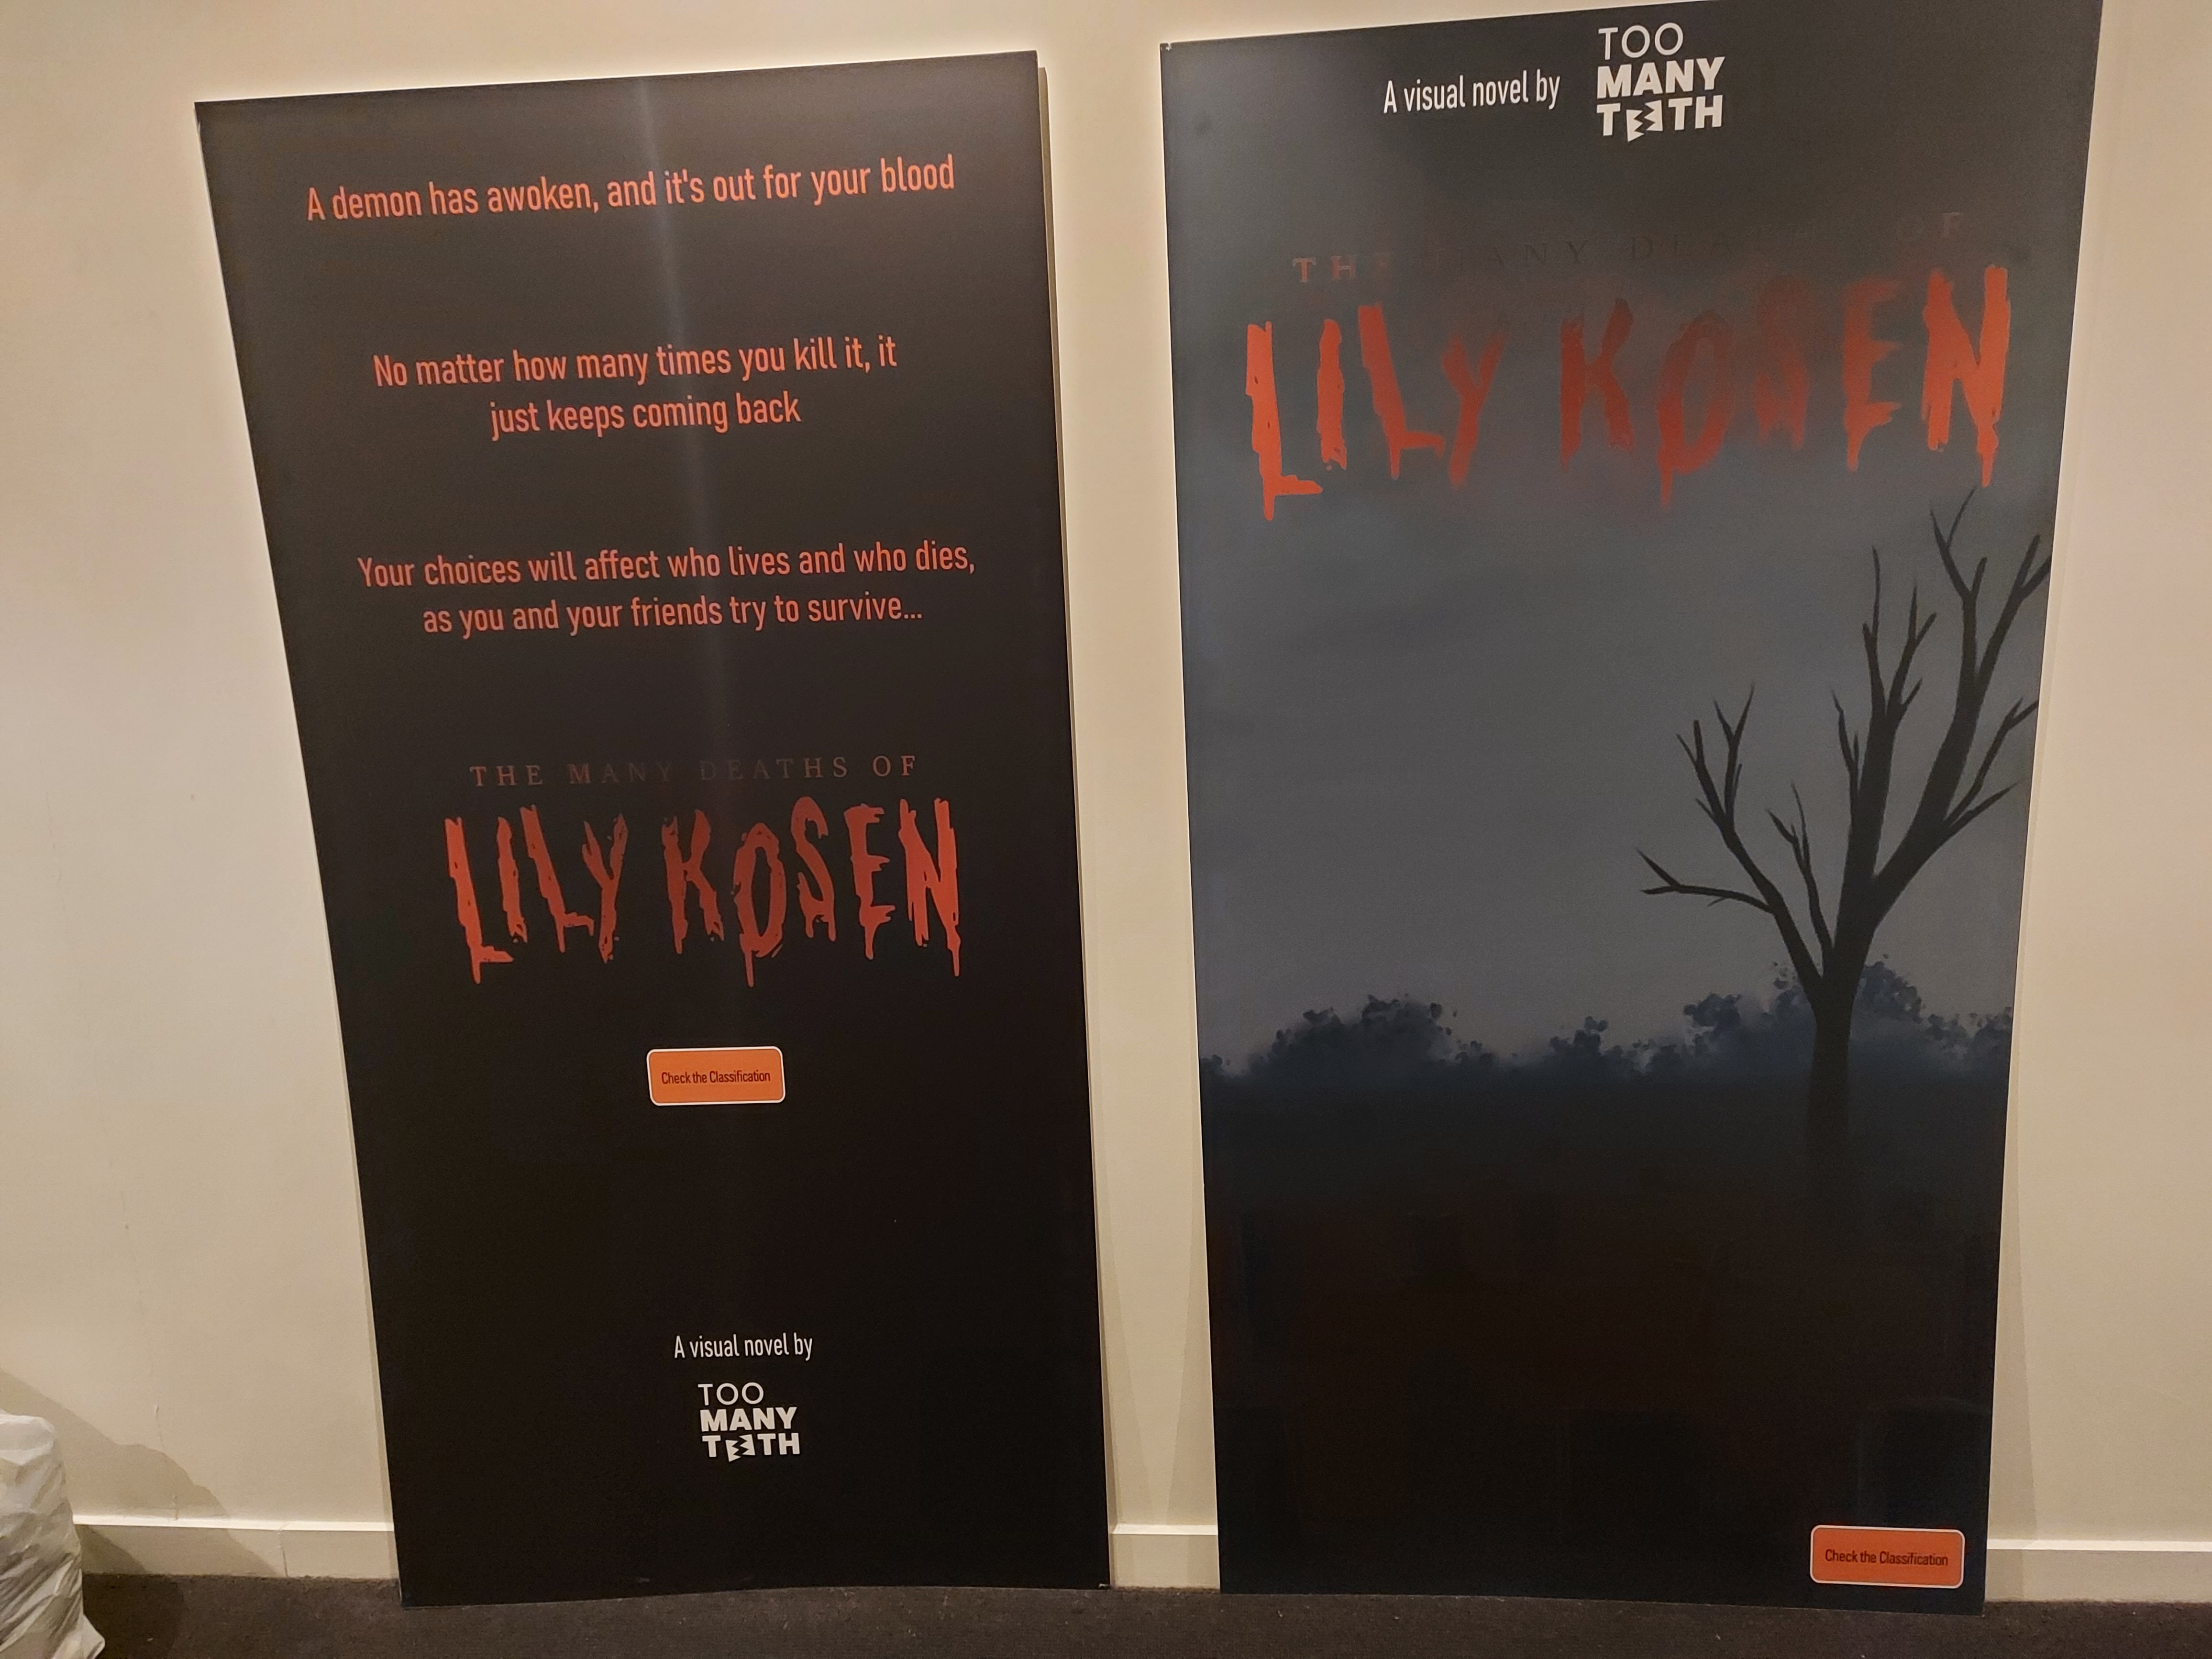 Two prints of artwork from The Many Deaths of Lily Kosen which were exhibited at PAX 2022